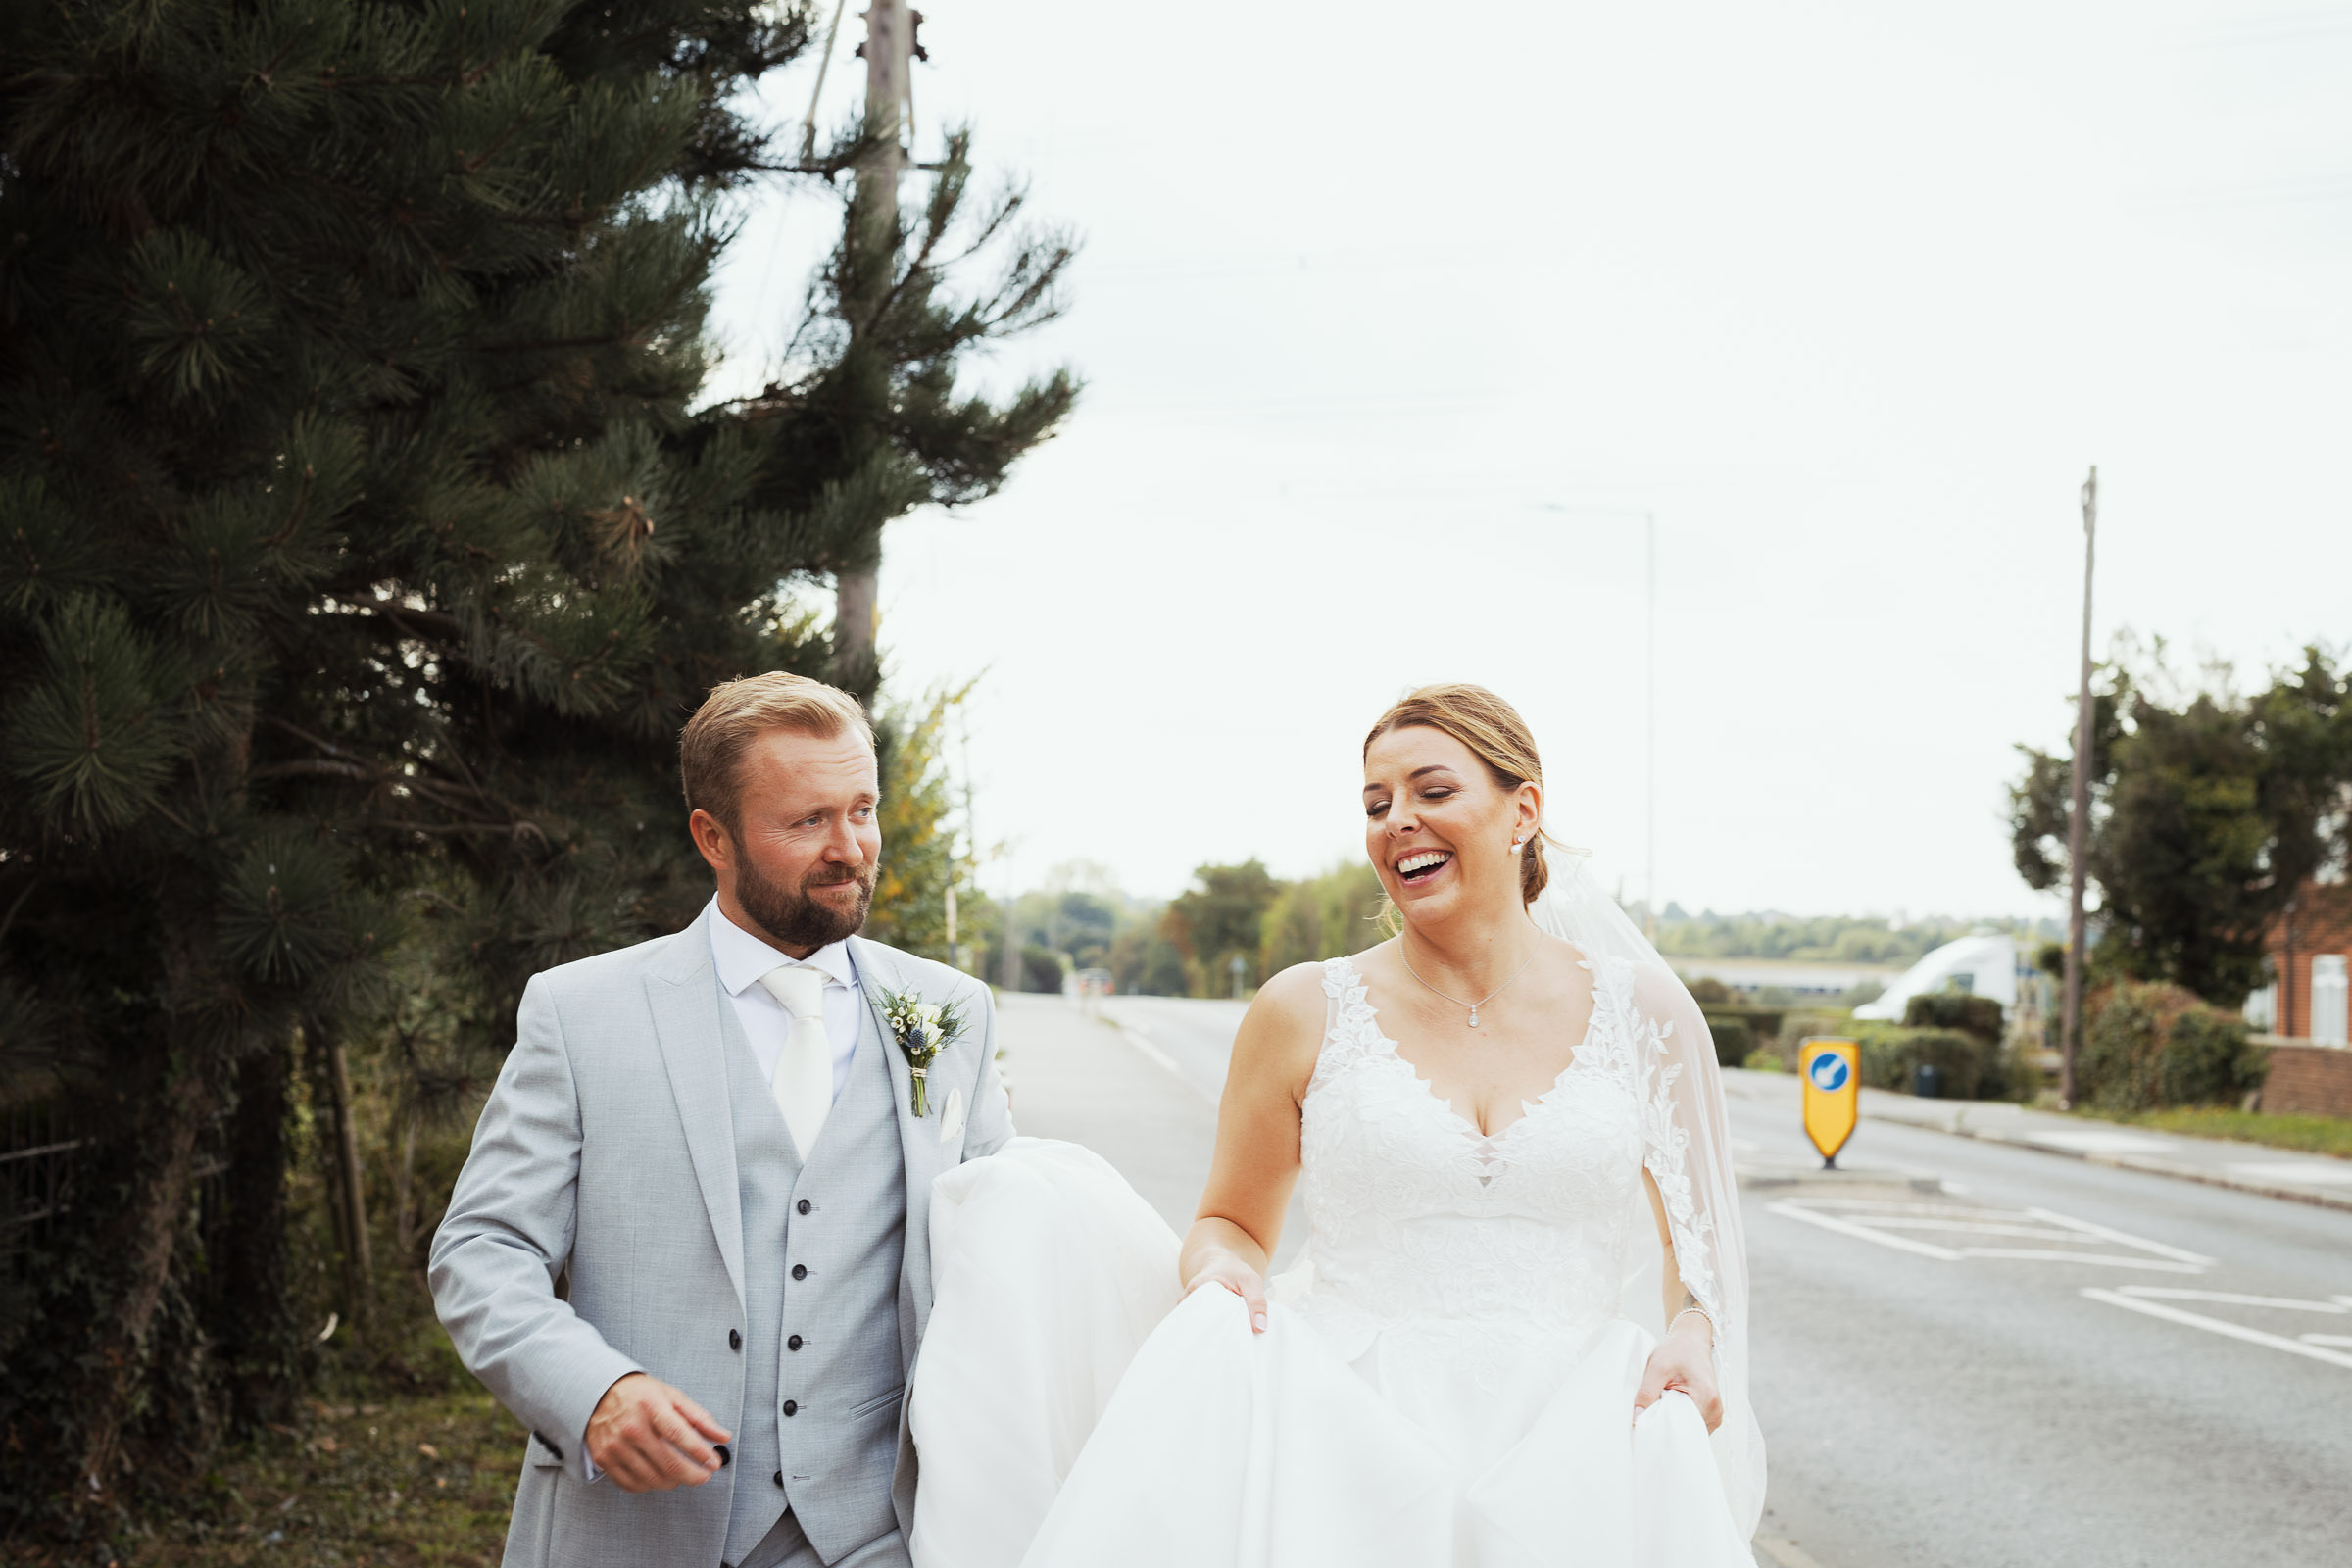 A bride and groom walking down the road outside The Lion House in Chelmsford on their wedding day.